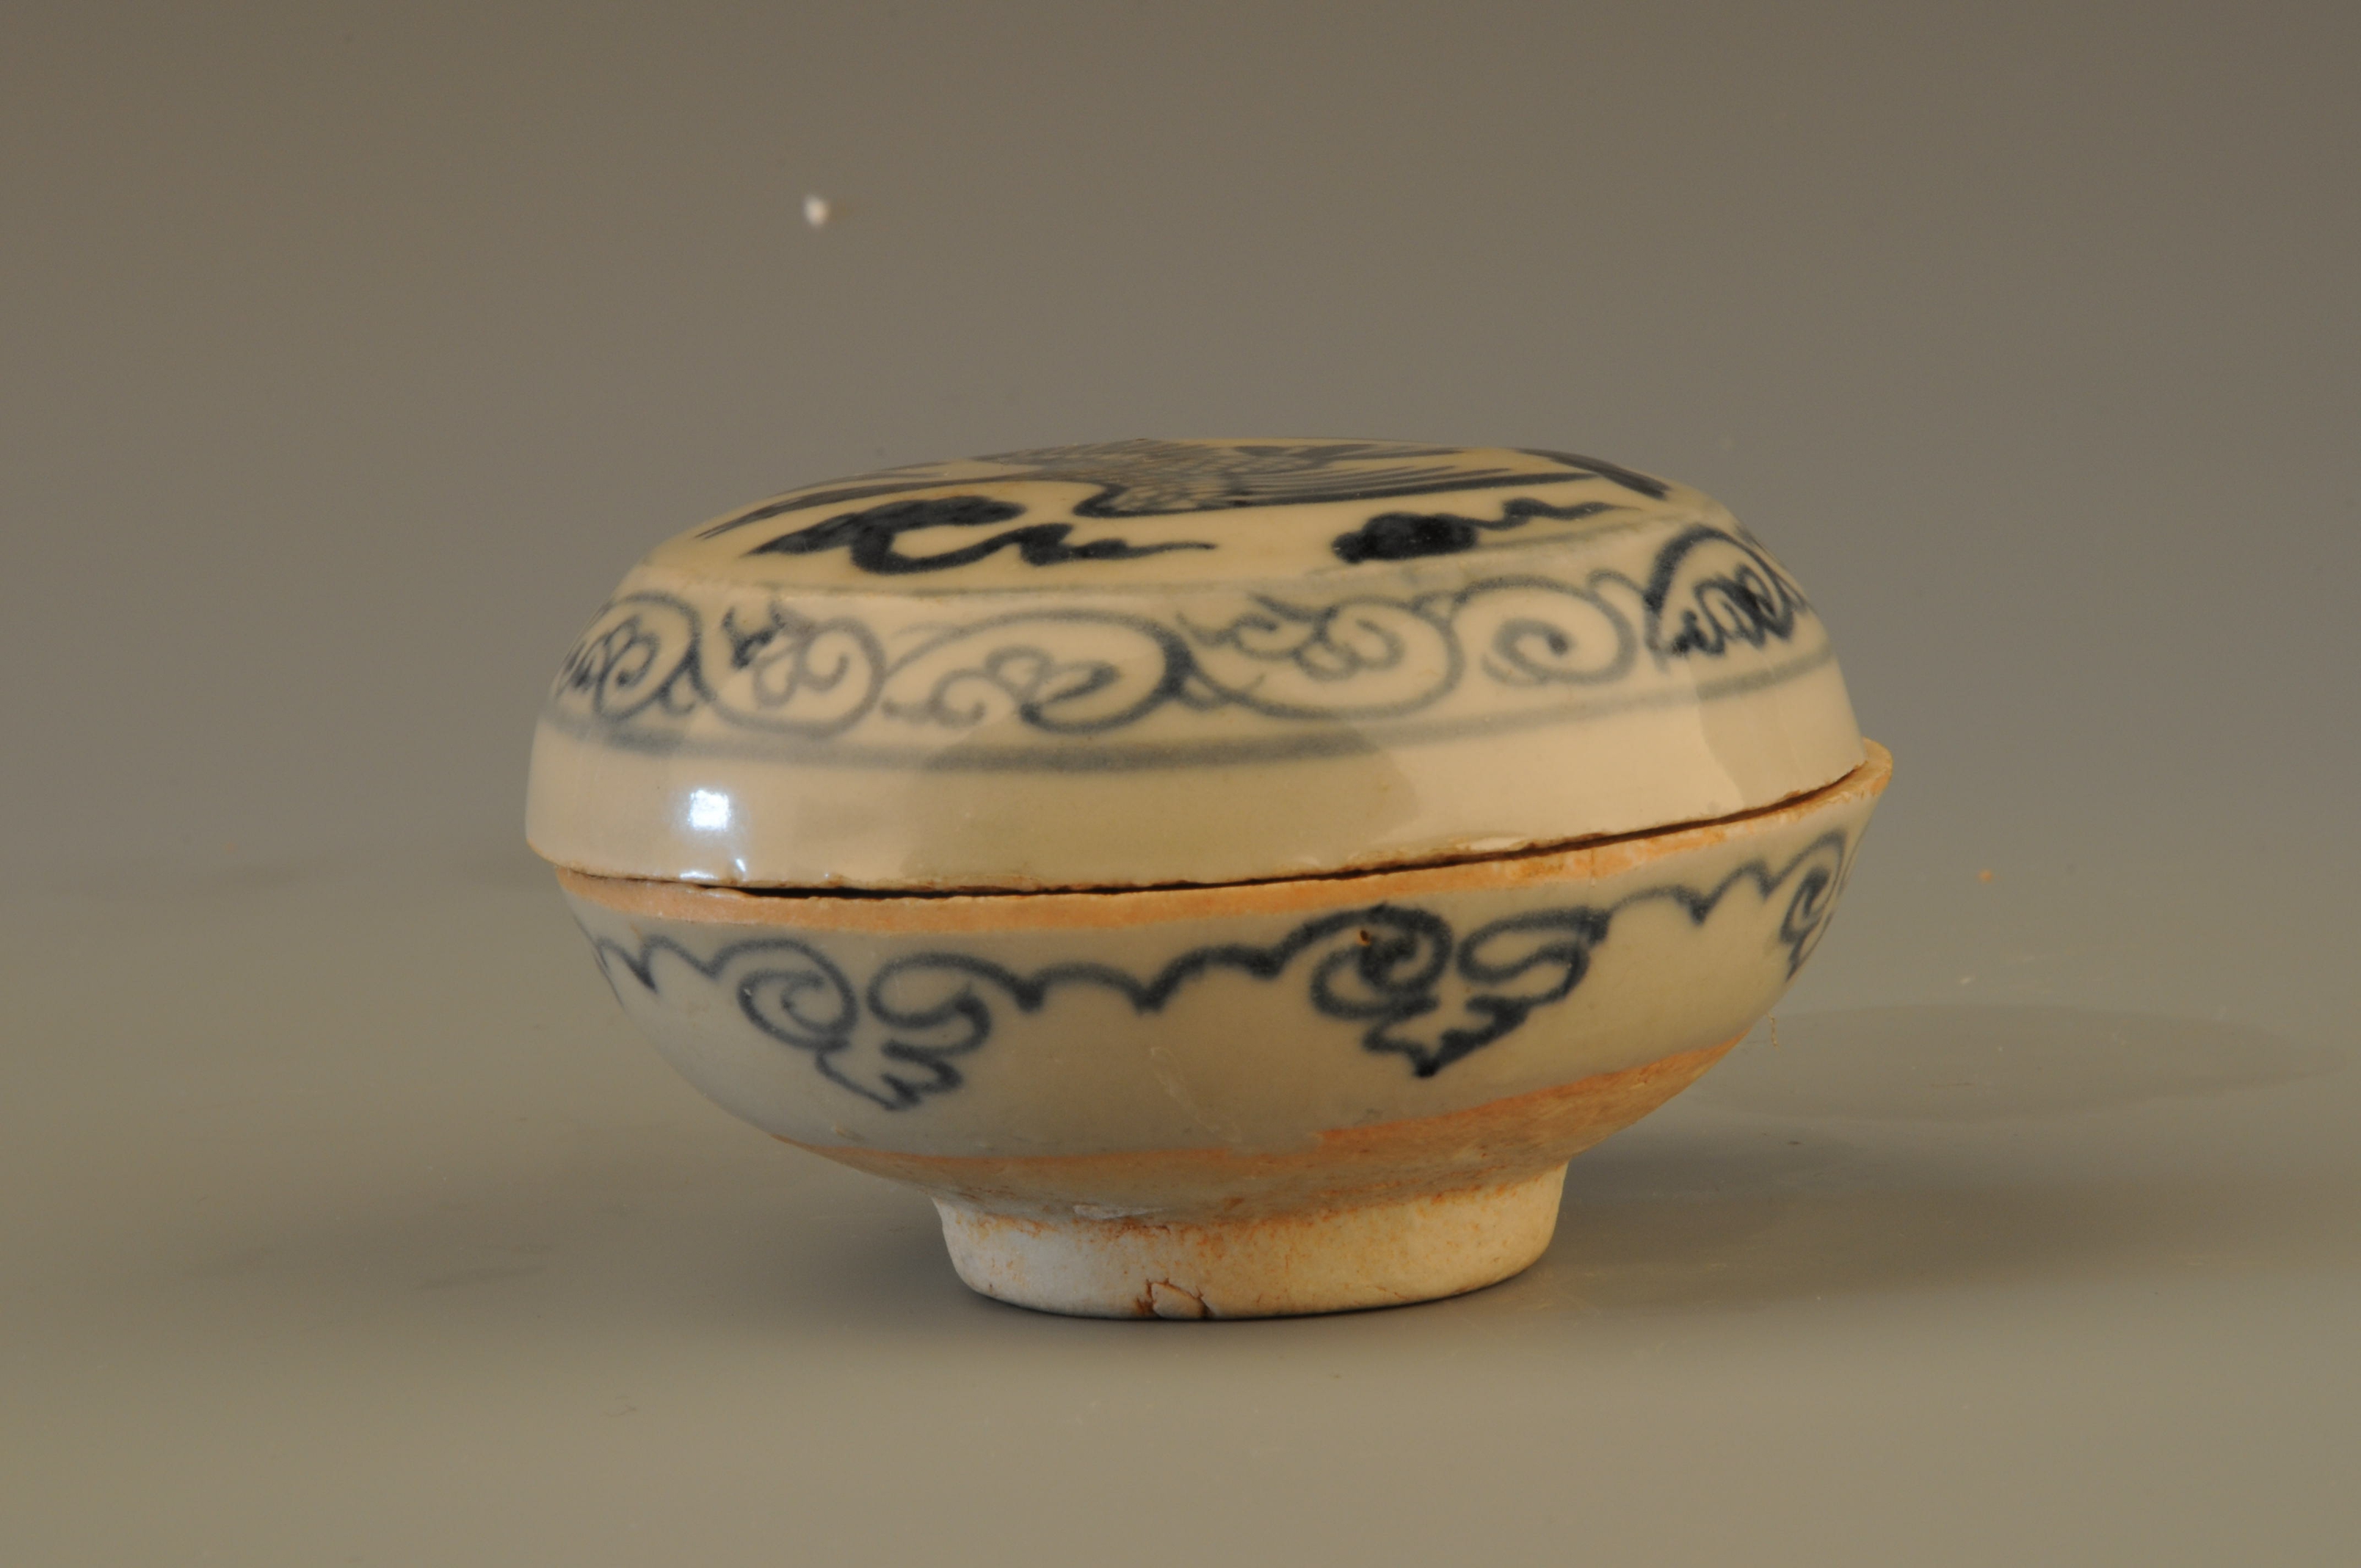 Blue and white porcelain powder box with flying geese pattern of Yuan Dynasty